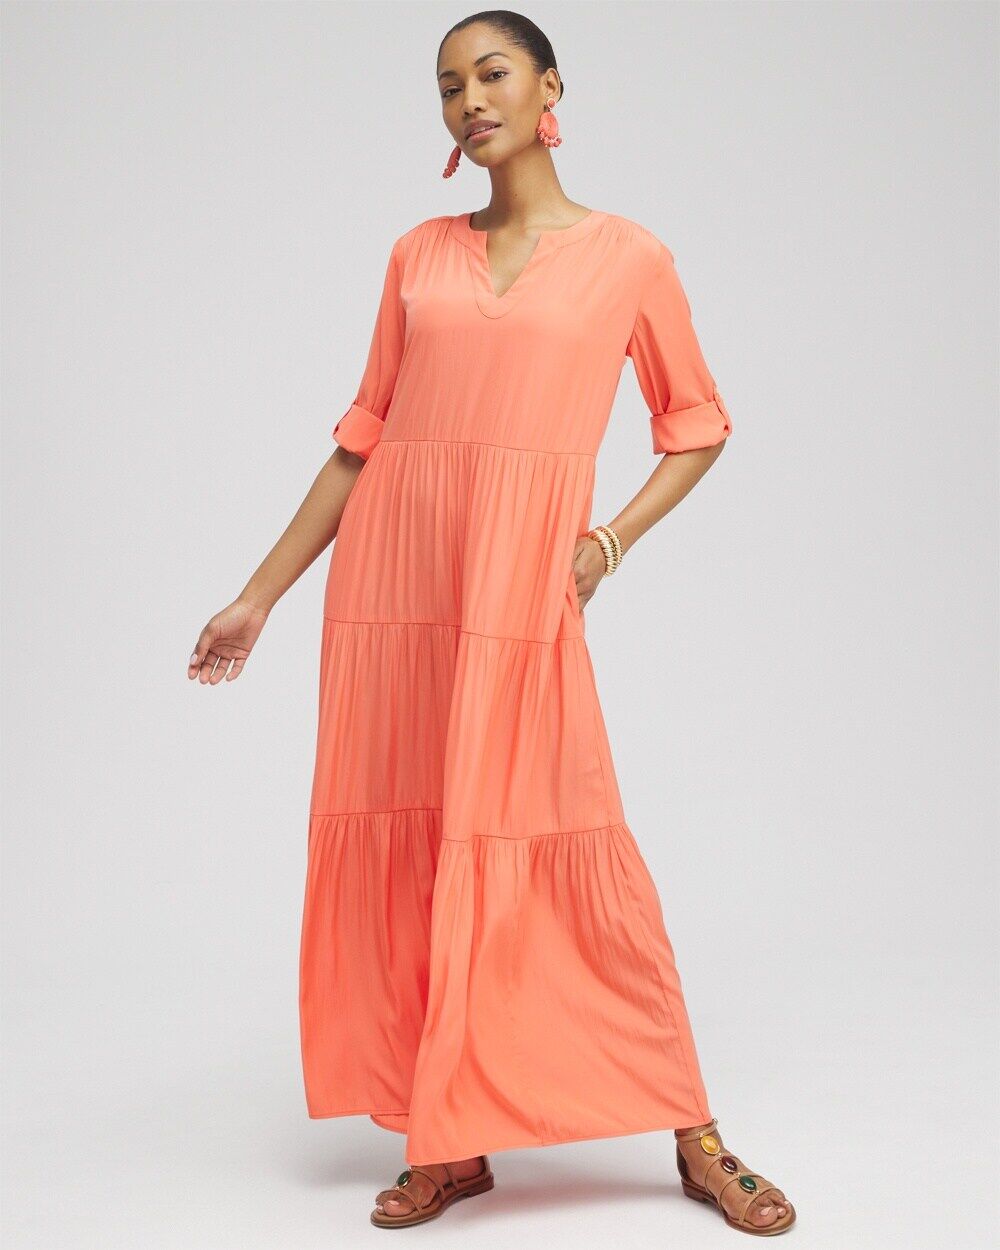 Women's Tiered A-line Maxi Dress in Nectarine size 16/18   Chico's, Easter Outfits - Nectarine - Women - Size: 16/18